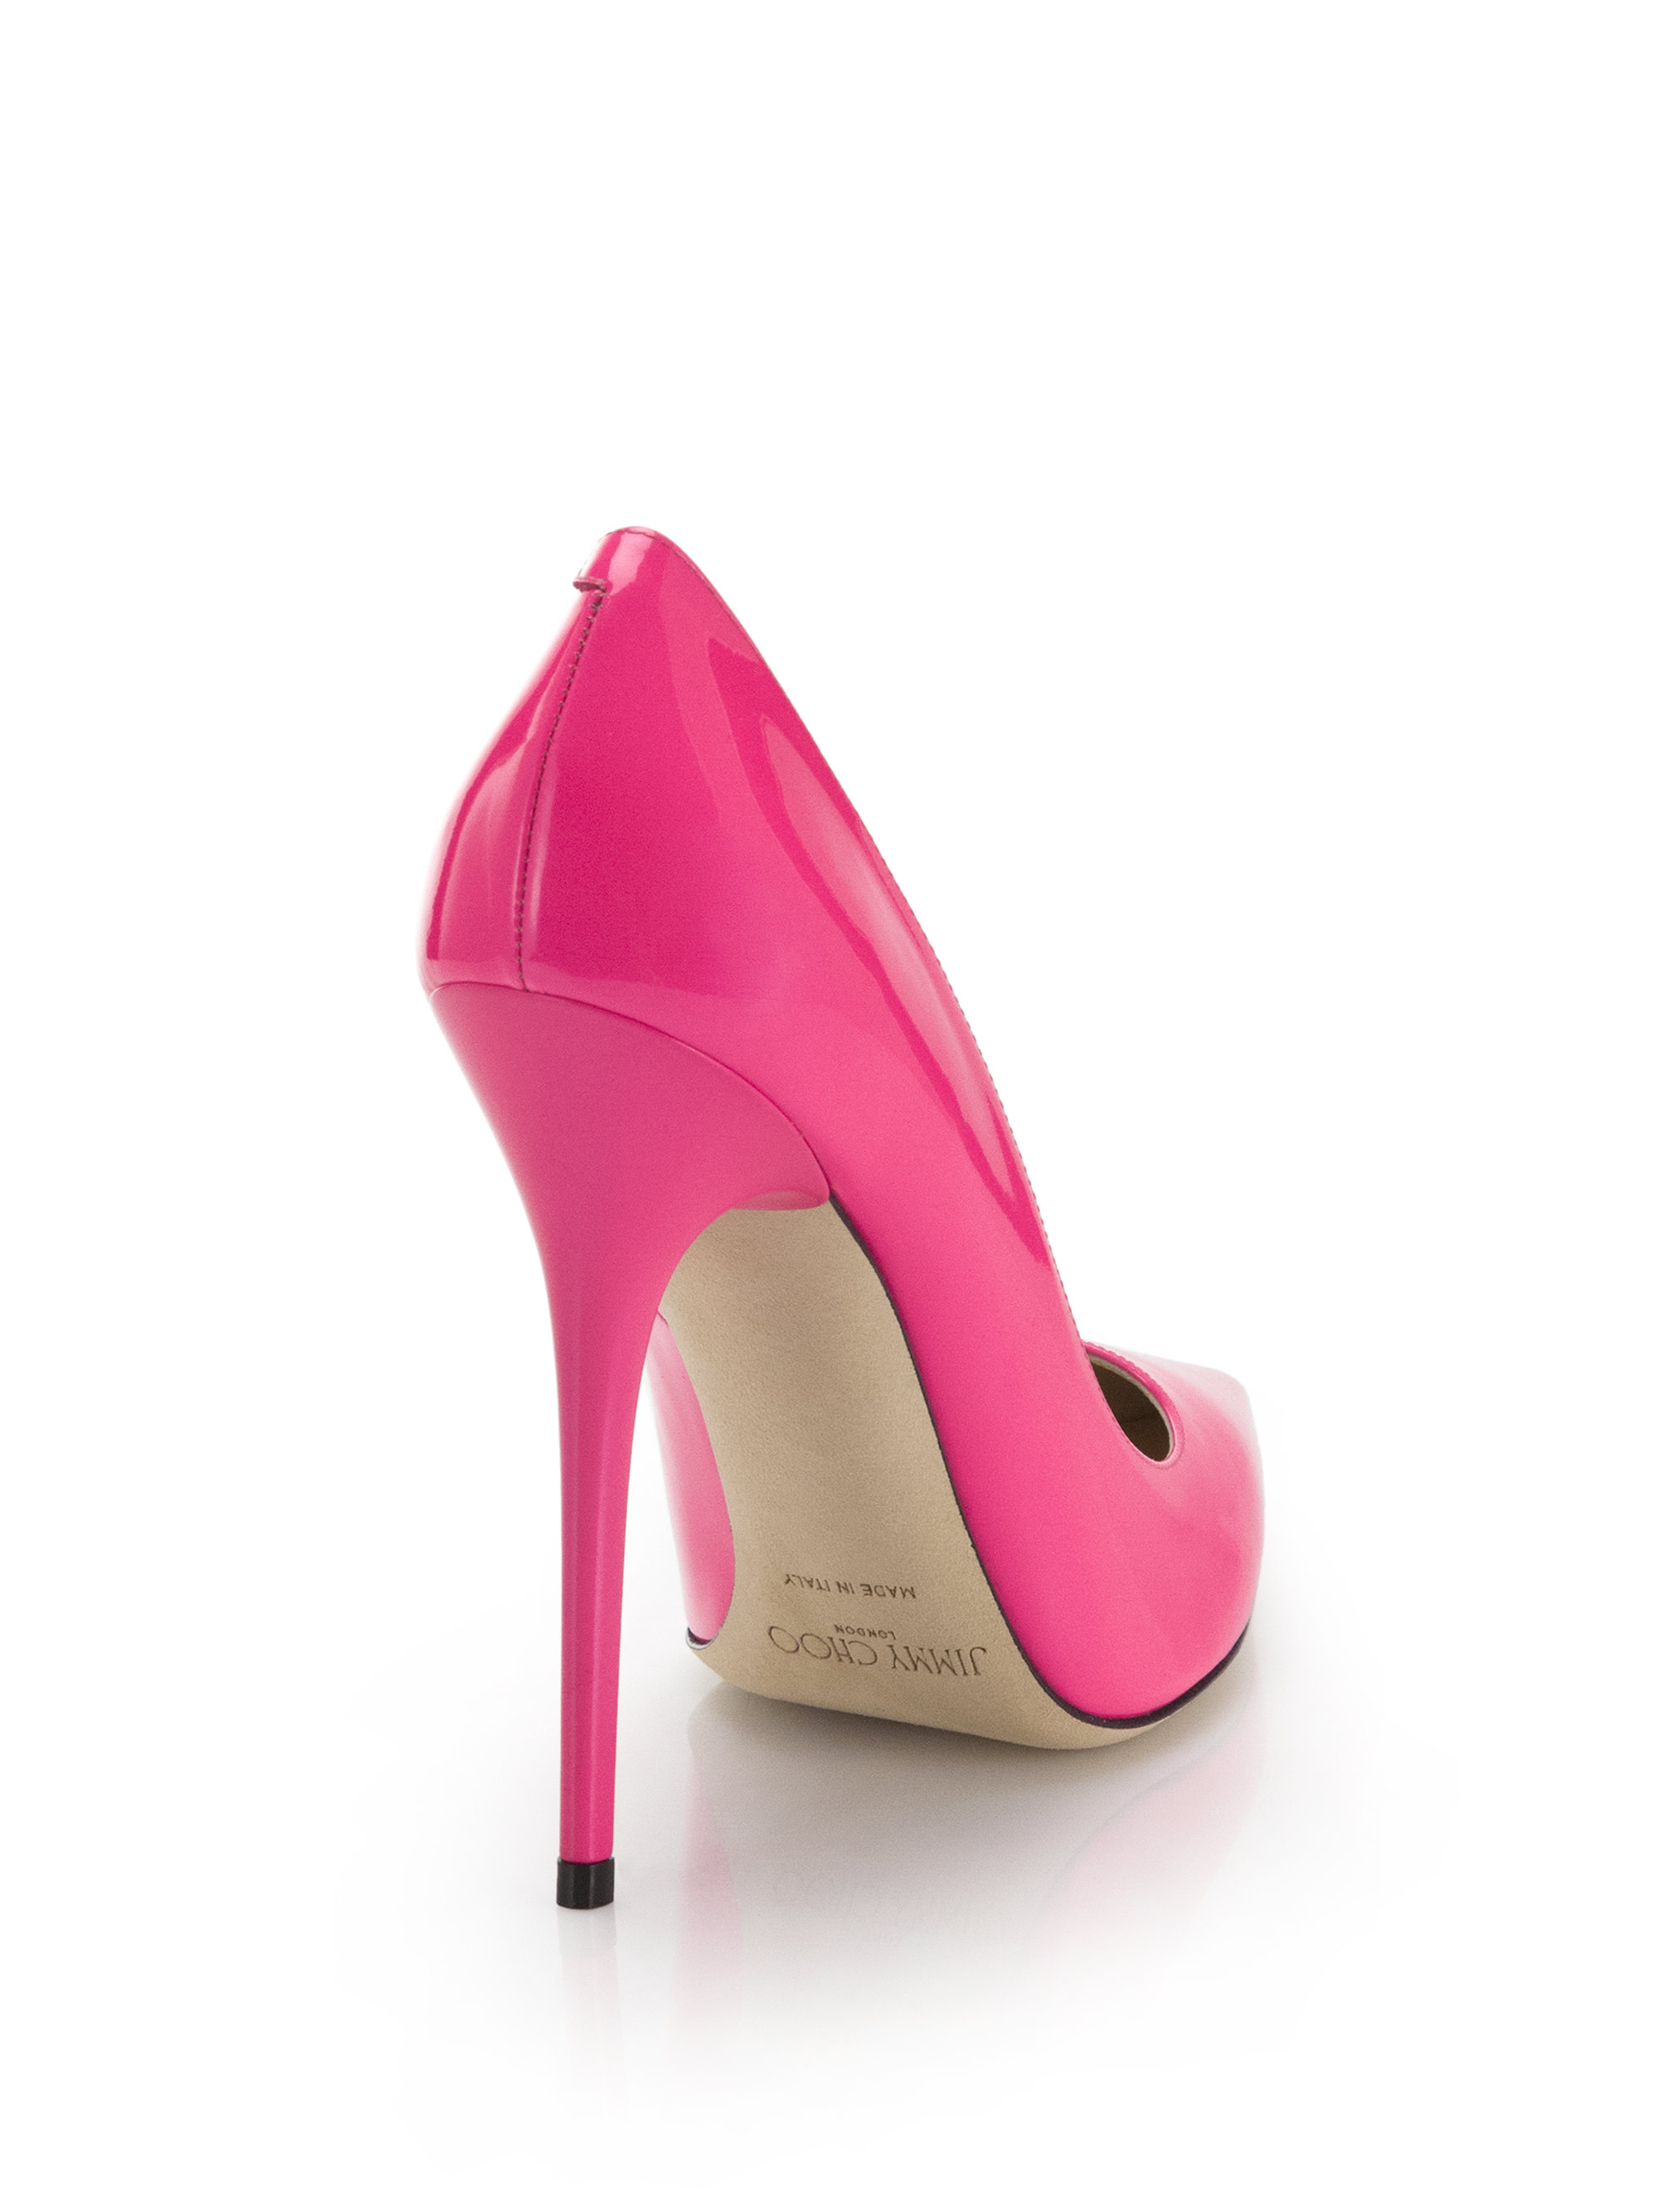 Lyst - Jimmy Choo Anouk Patent Leather Pumps in Pink